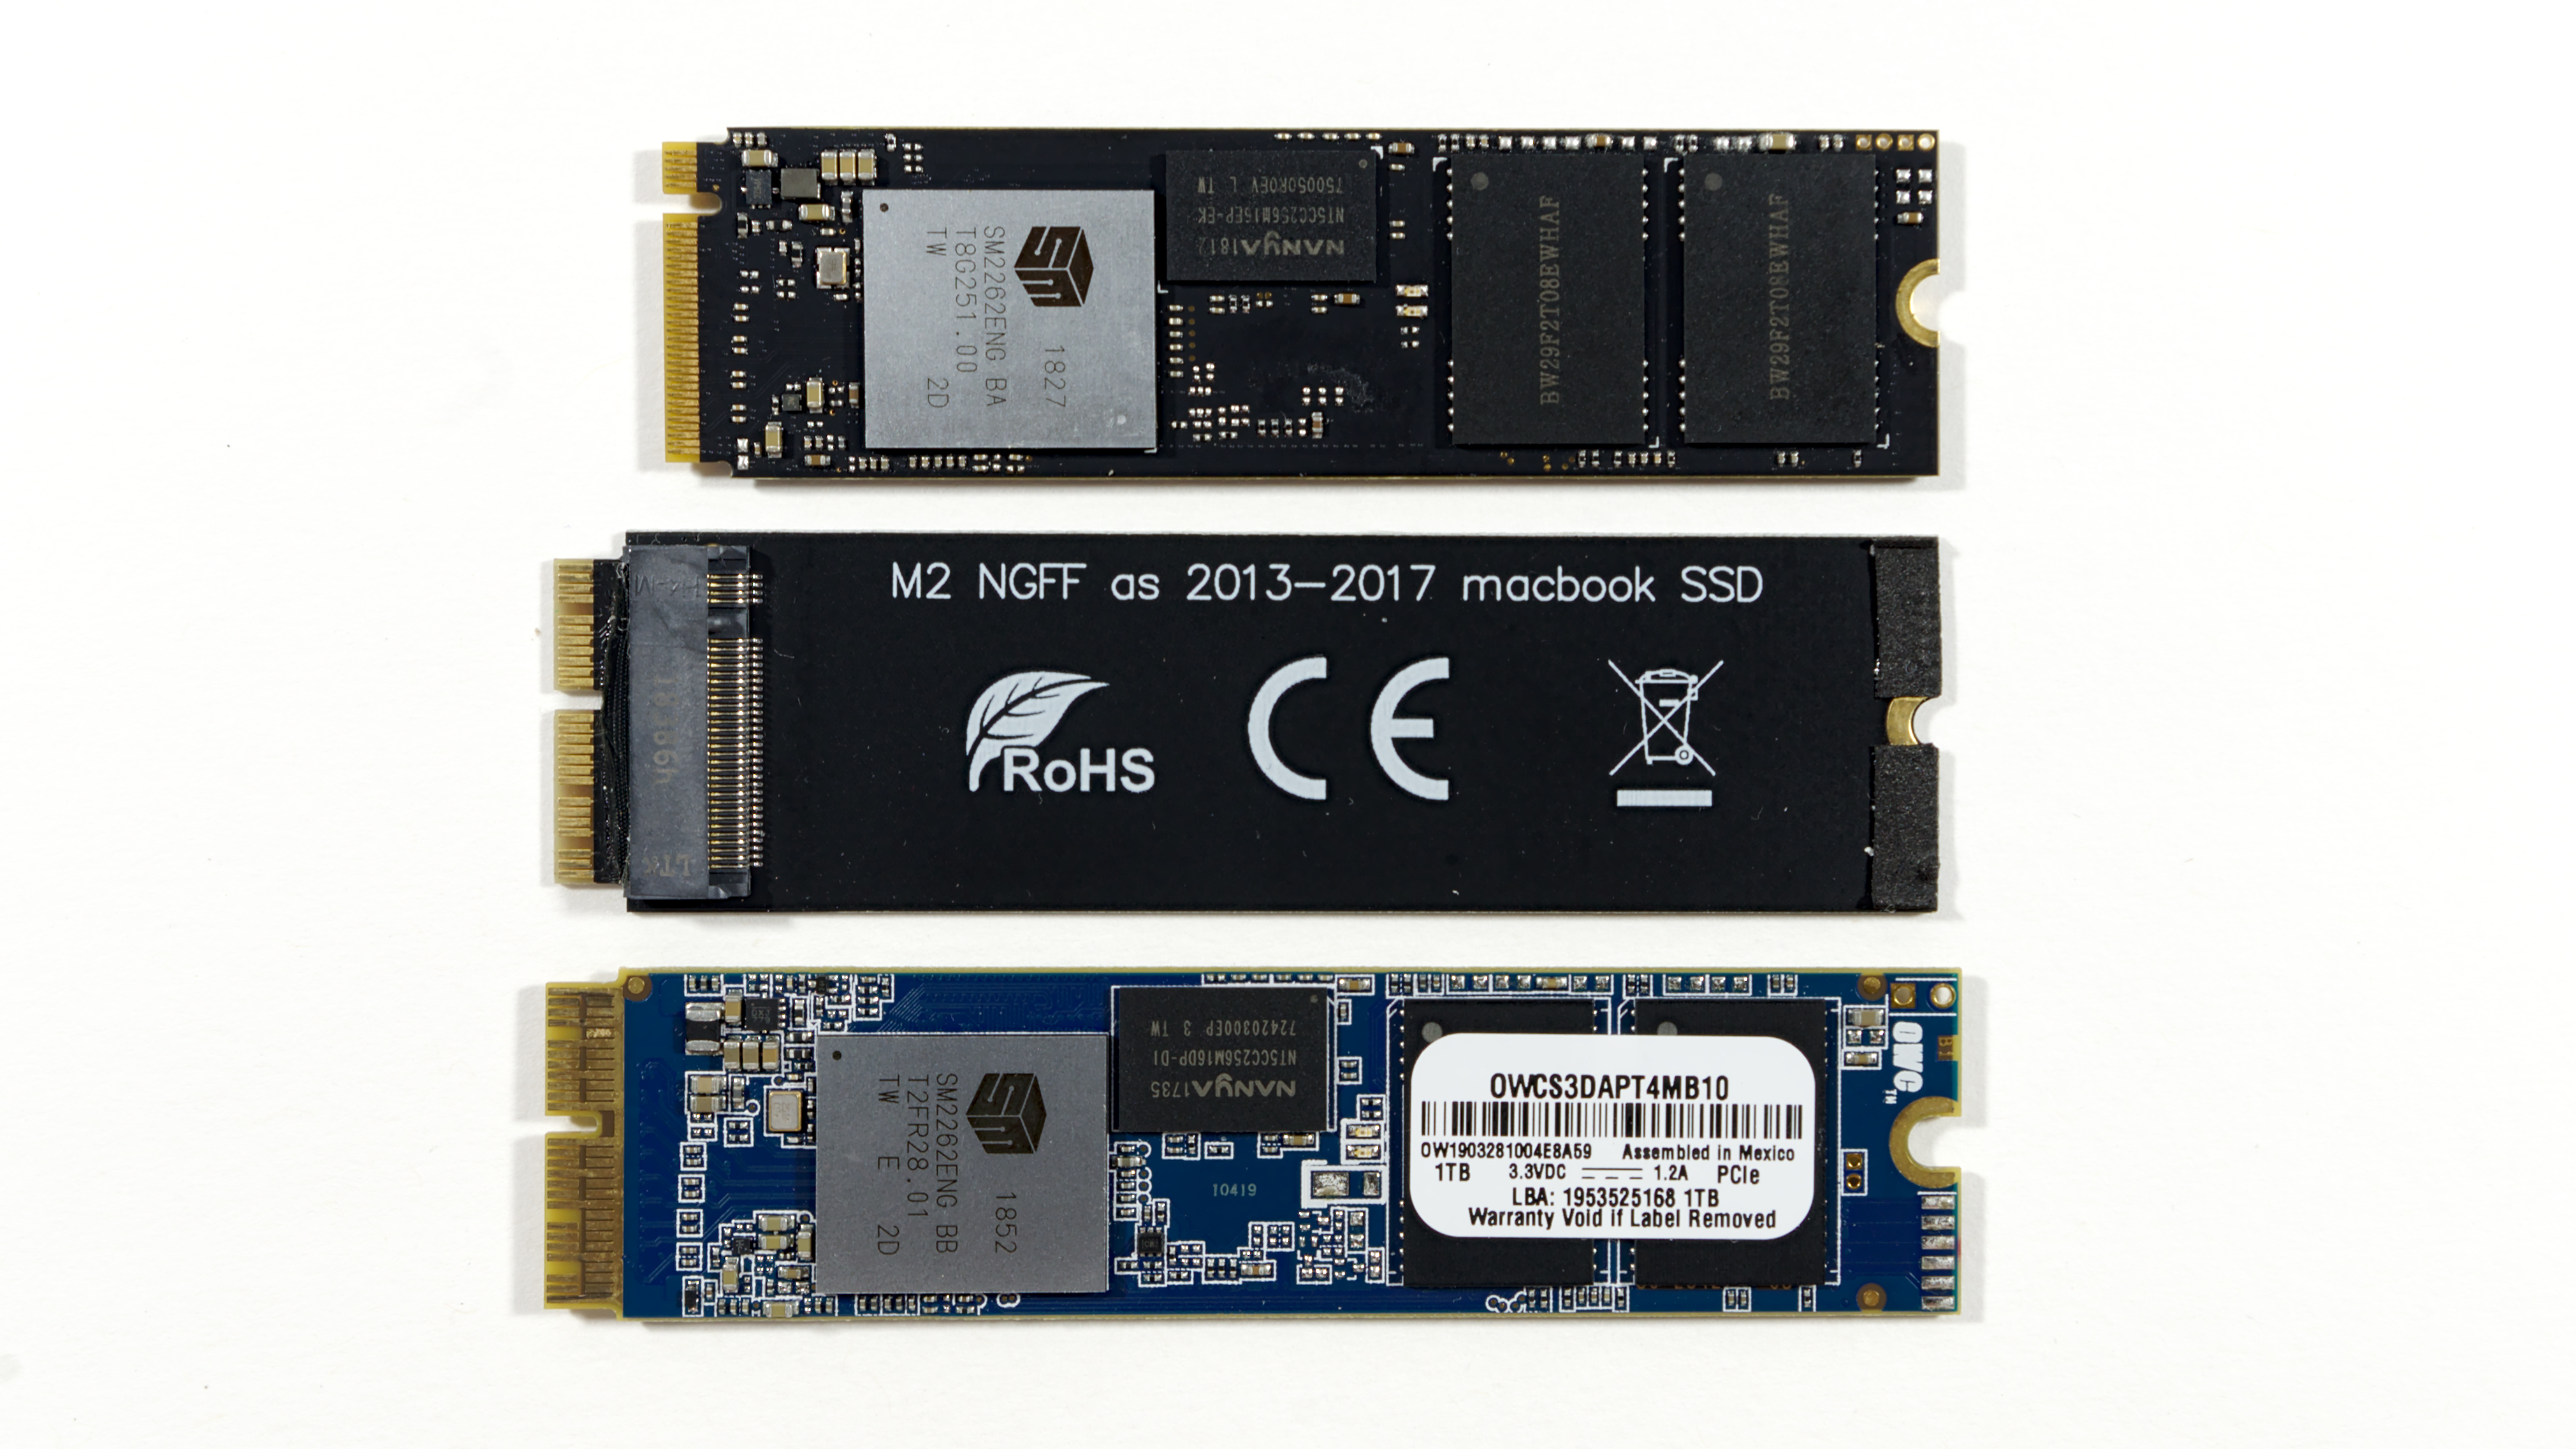 Feather M13-S SSD iMac 2013-2017 MacBook Air 2013-2017 256GB with Tools m.2 NVMe PCIe Drive Upgrade for Apple MacBook Pro 2013-2015 macOS